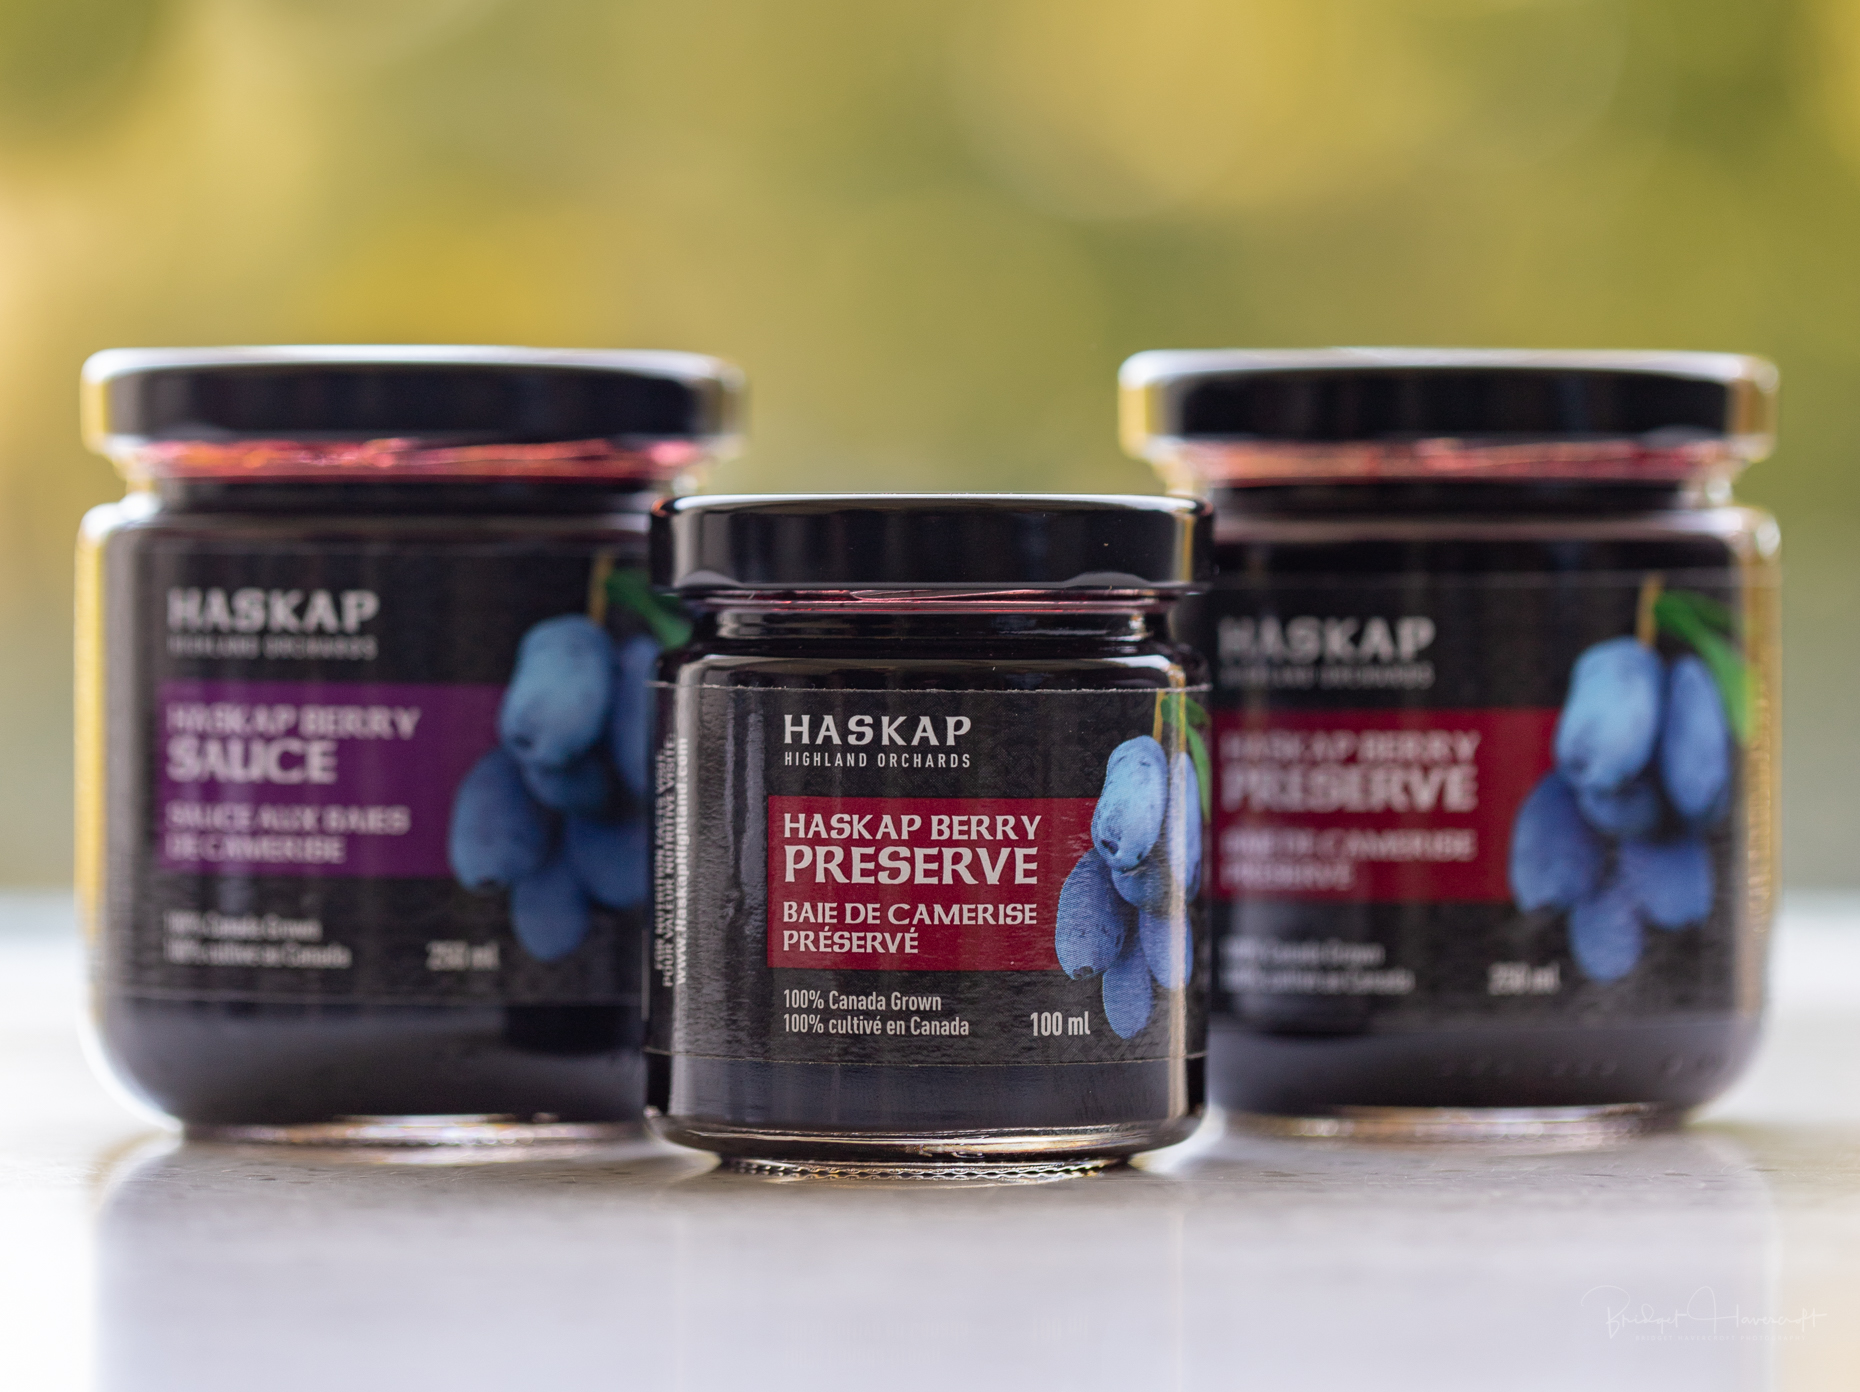 Haskap Highland Berries-Product selection of preserves and sauce